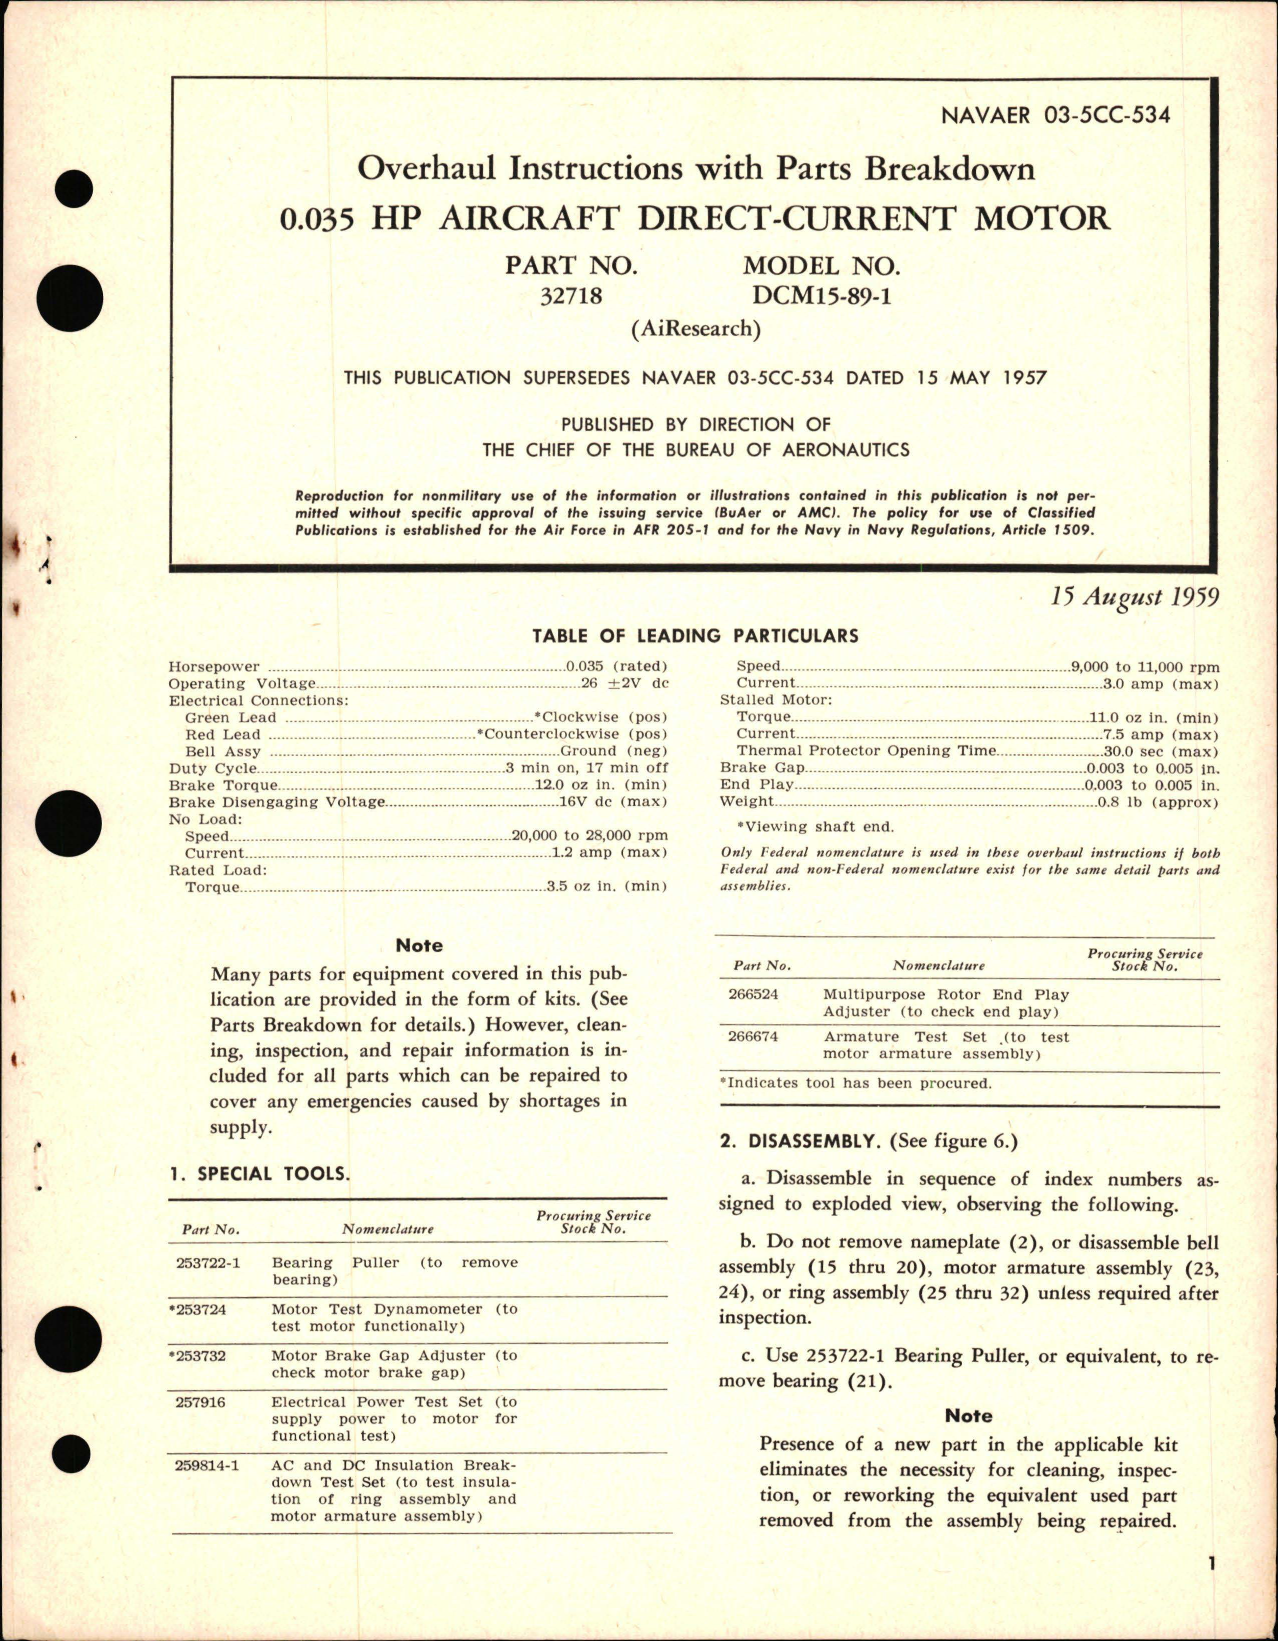 Sample page 1 from AirCorps Library document: Overhaul Instructions with Parts Breakdown for HP Aircraft Direct Current Motor 0.035 - Part 32718